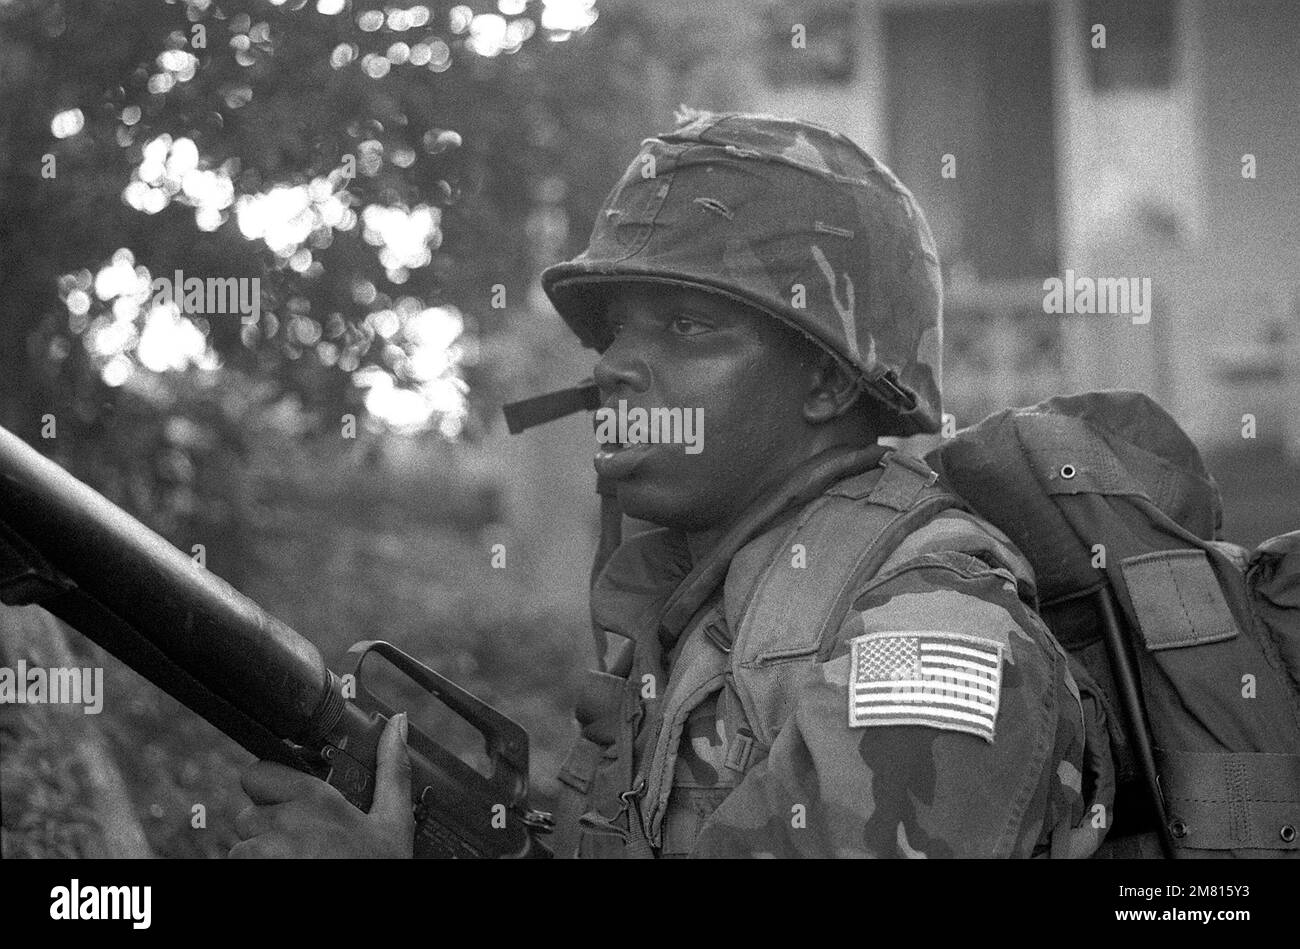 A Marine armed with M16A1 rifle patrols the area around Grenville during Operation URGENT FURY. Subject Operation/Series: URGENT FURY Base: Grenville Country: Grenada (GRD) Stock Photo